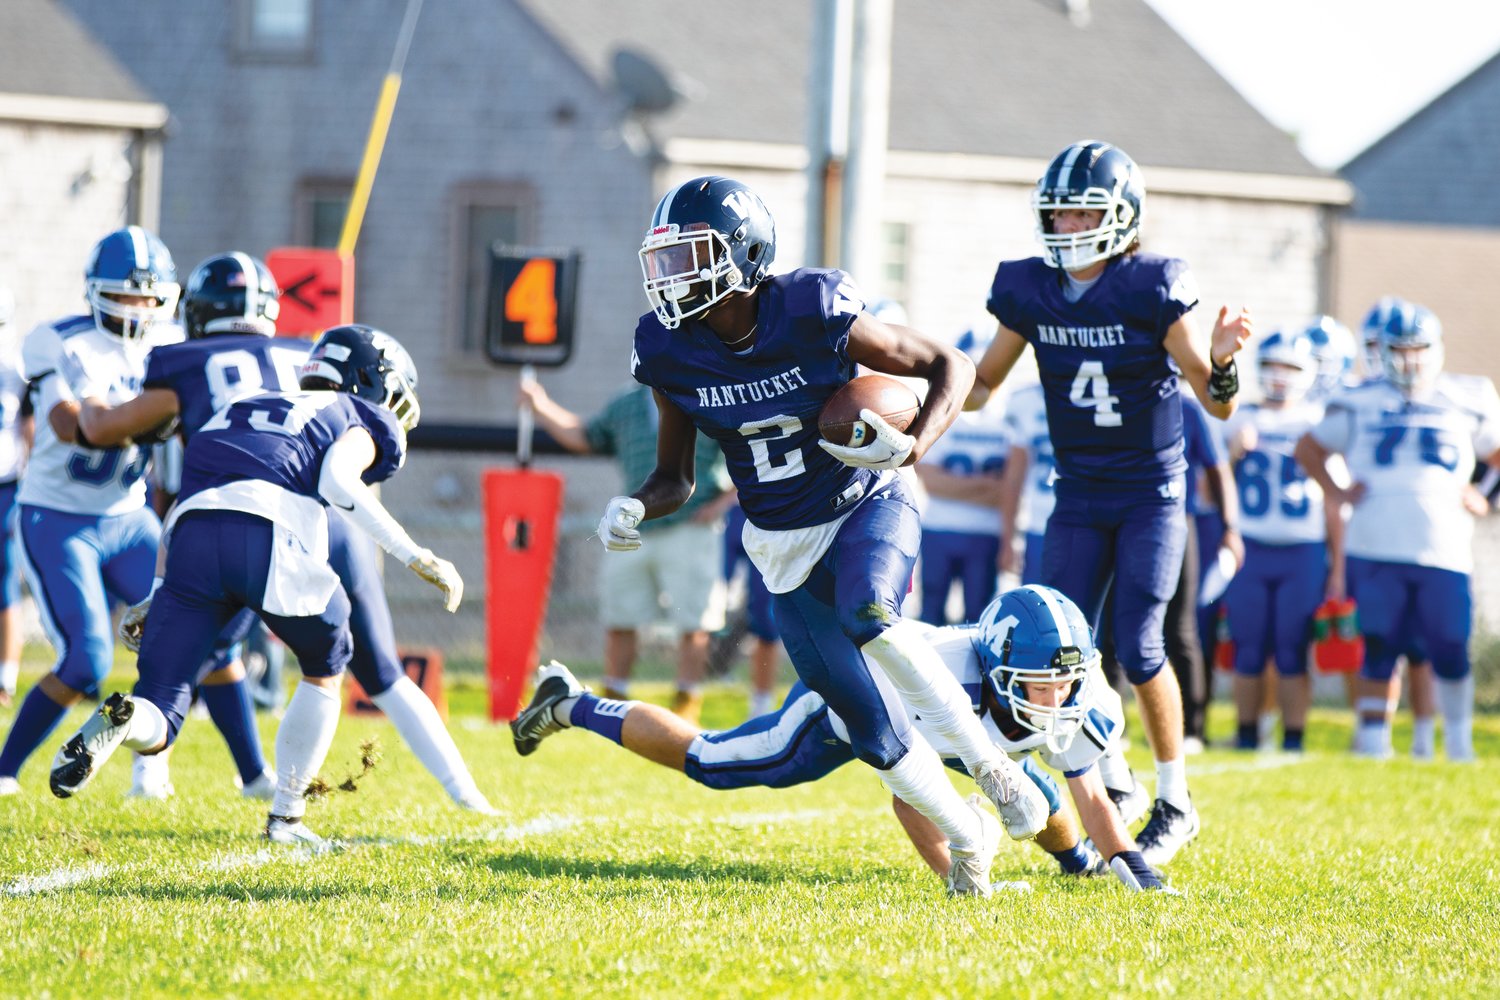 Jayquan Francis scores the Whalers’ first touchdown on a fourth-down play against Mashpee Saturday.